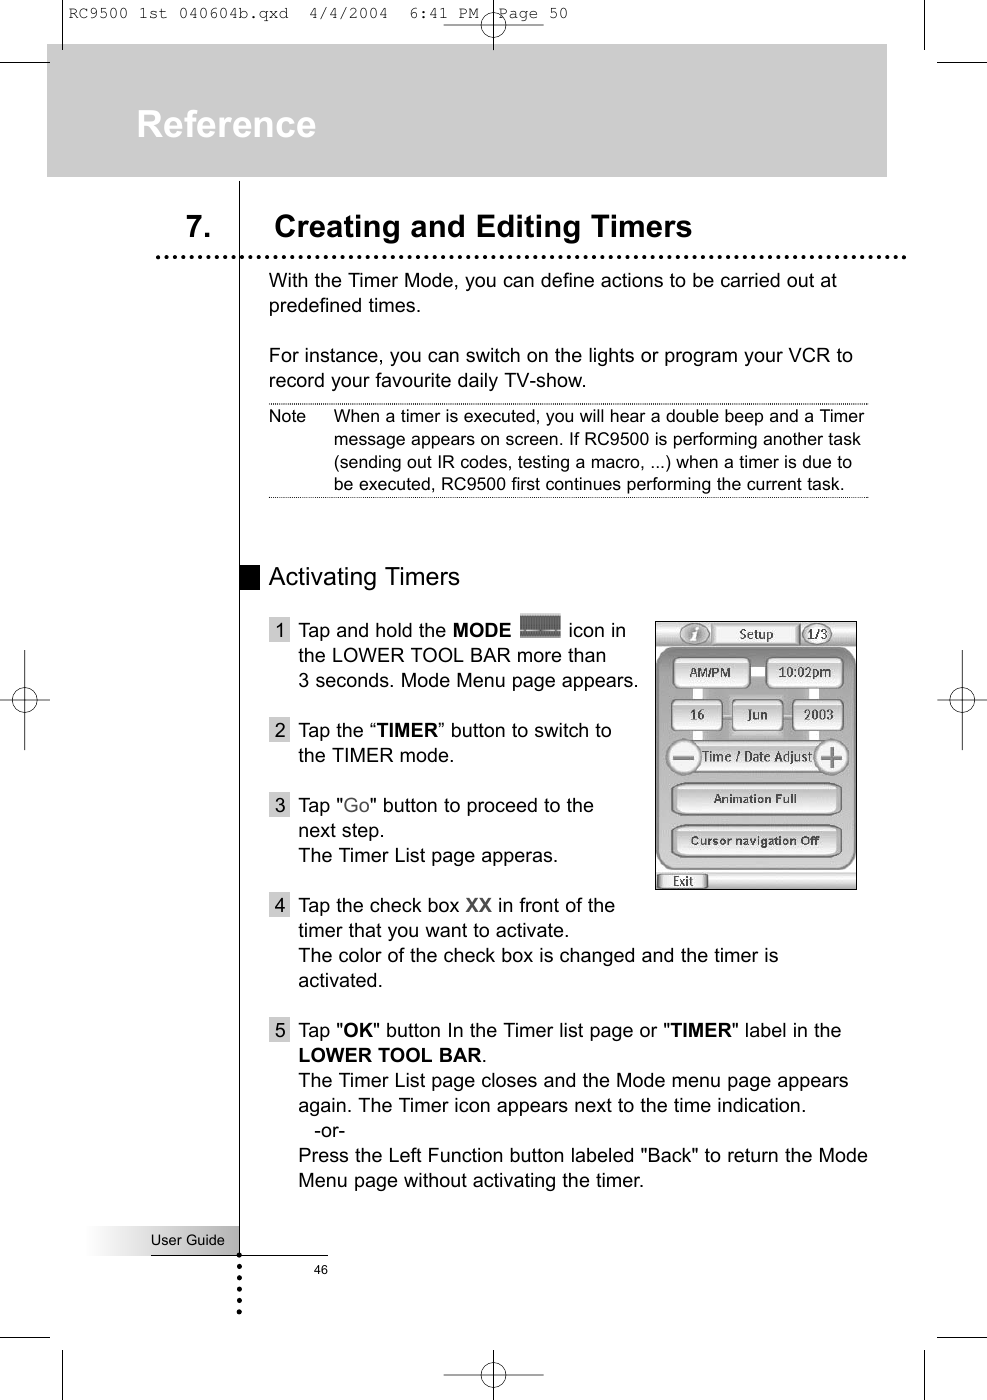 With the Timer Mode, you can define actions to be carried out atpredefined times.For instance, you can switch on the lights or program your VCR torecord your favourite daily TV-show.Note When a timer is executed, you will hear a double beep and a Timermessage appears on screen. If RC9500 is performing another task(sending out IR codes, testing a macro, ...) when a timer is due tobe executed, RC9500 first continues performing the current task.Activating Timers1 Tap and hold the MODE icon in the LOWER TOOL BAR more than 3 seconds. Mode Menu page appears.2 Tap the “TIMER” button to switch to the TIMER mode.3 Tap &quot;Go&quot; button to proceed to the next step.The Timer List page apperas.4 Tap the check box XX in front of the timer that you want to activate.The color of the check box is changed and the timer isactivated.5 Tap &quot;OK&quot; button In the Timer list page or &quot;TIMER&quot; label in theLOWER TOOL BAR.The Timer List page closes and the Mode menu page appearsagain. The Timer icon appears next to the time indication.-or-Press the Left Function button labeled &quot;Back&quot; to return the ModeMenu page without activating the timer.User Guide46Reference7. Creating and Editing TimersRC9500 1st 040604b.qxd  4/4/2004  6:41 PM  Page 50